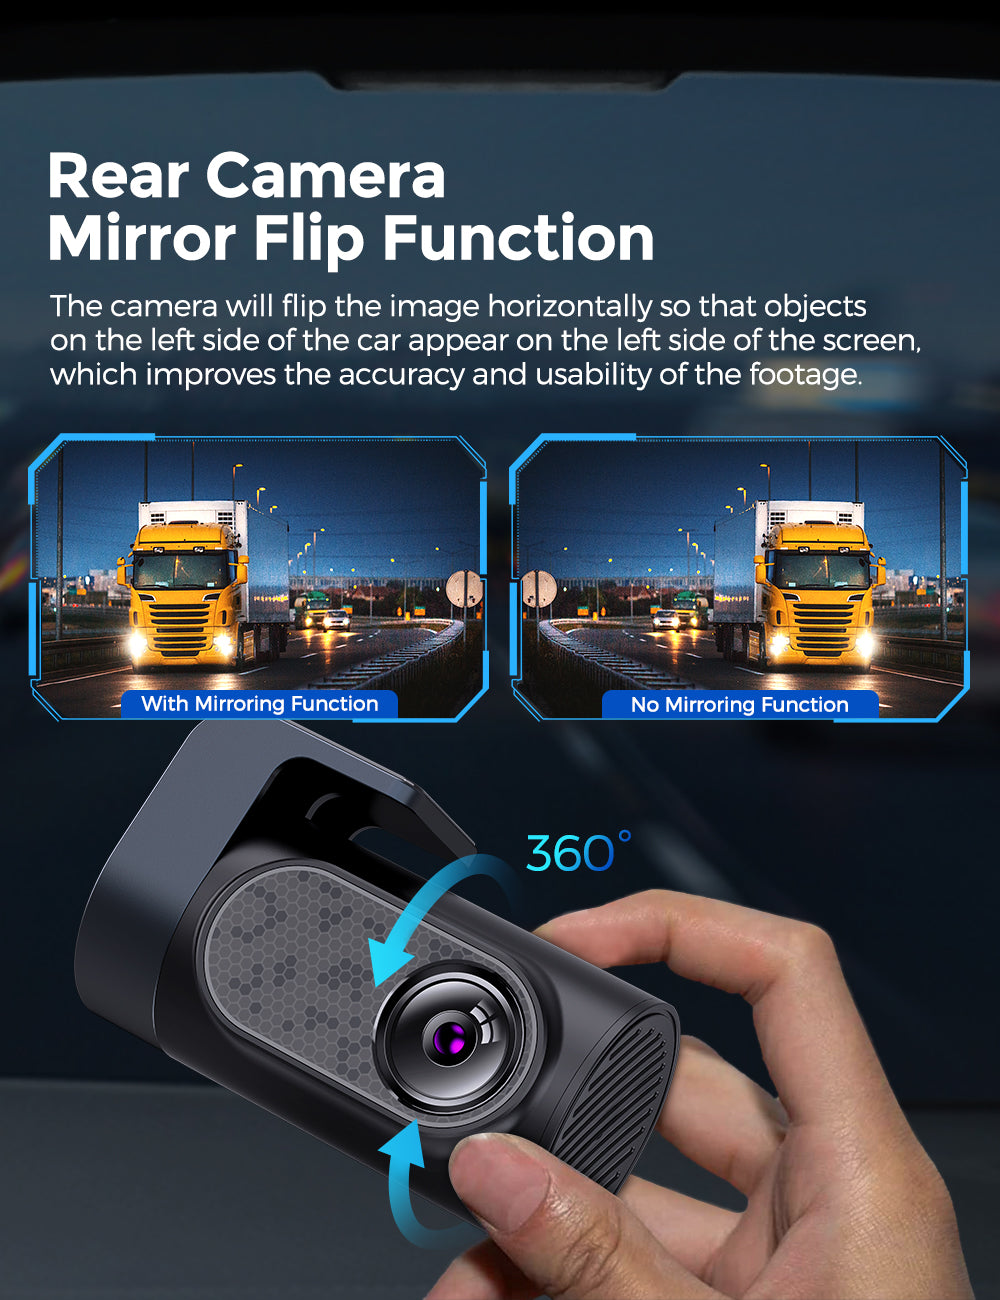 AZDOME M550 Pro 2CH Dash Cam 4K with  3.19'' Screen IR Night Vision 24H Parking Mode